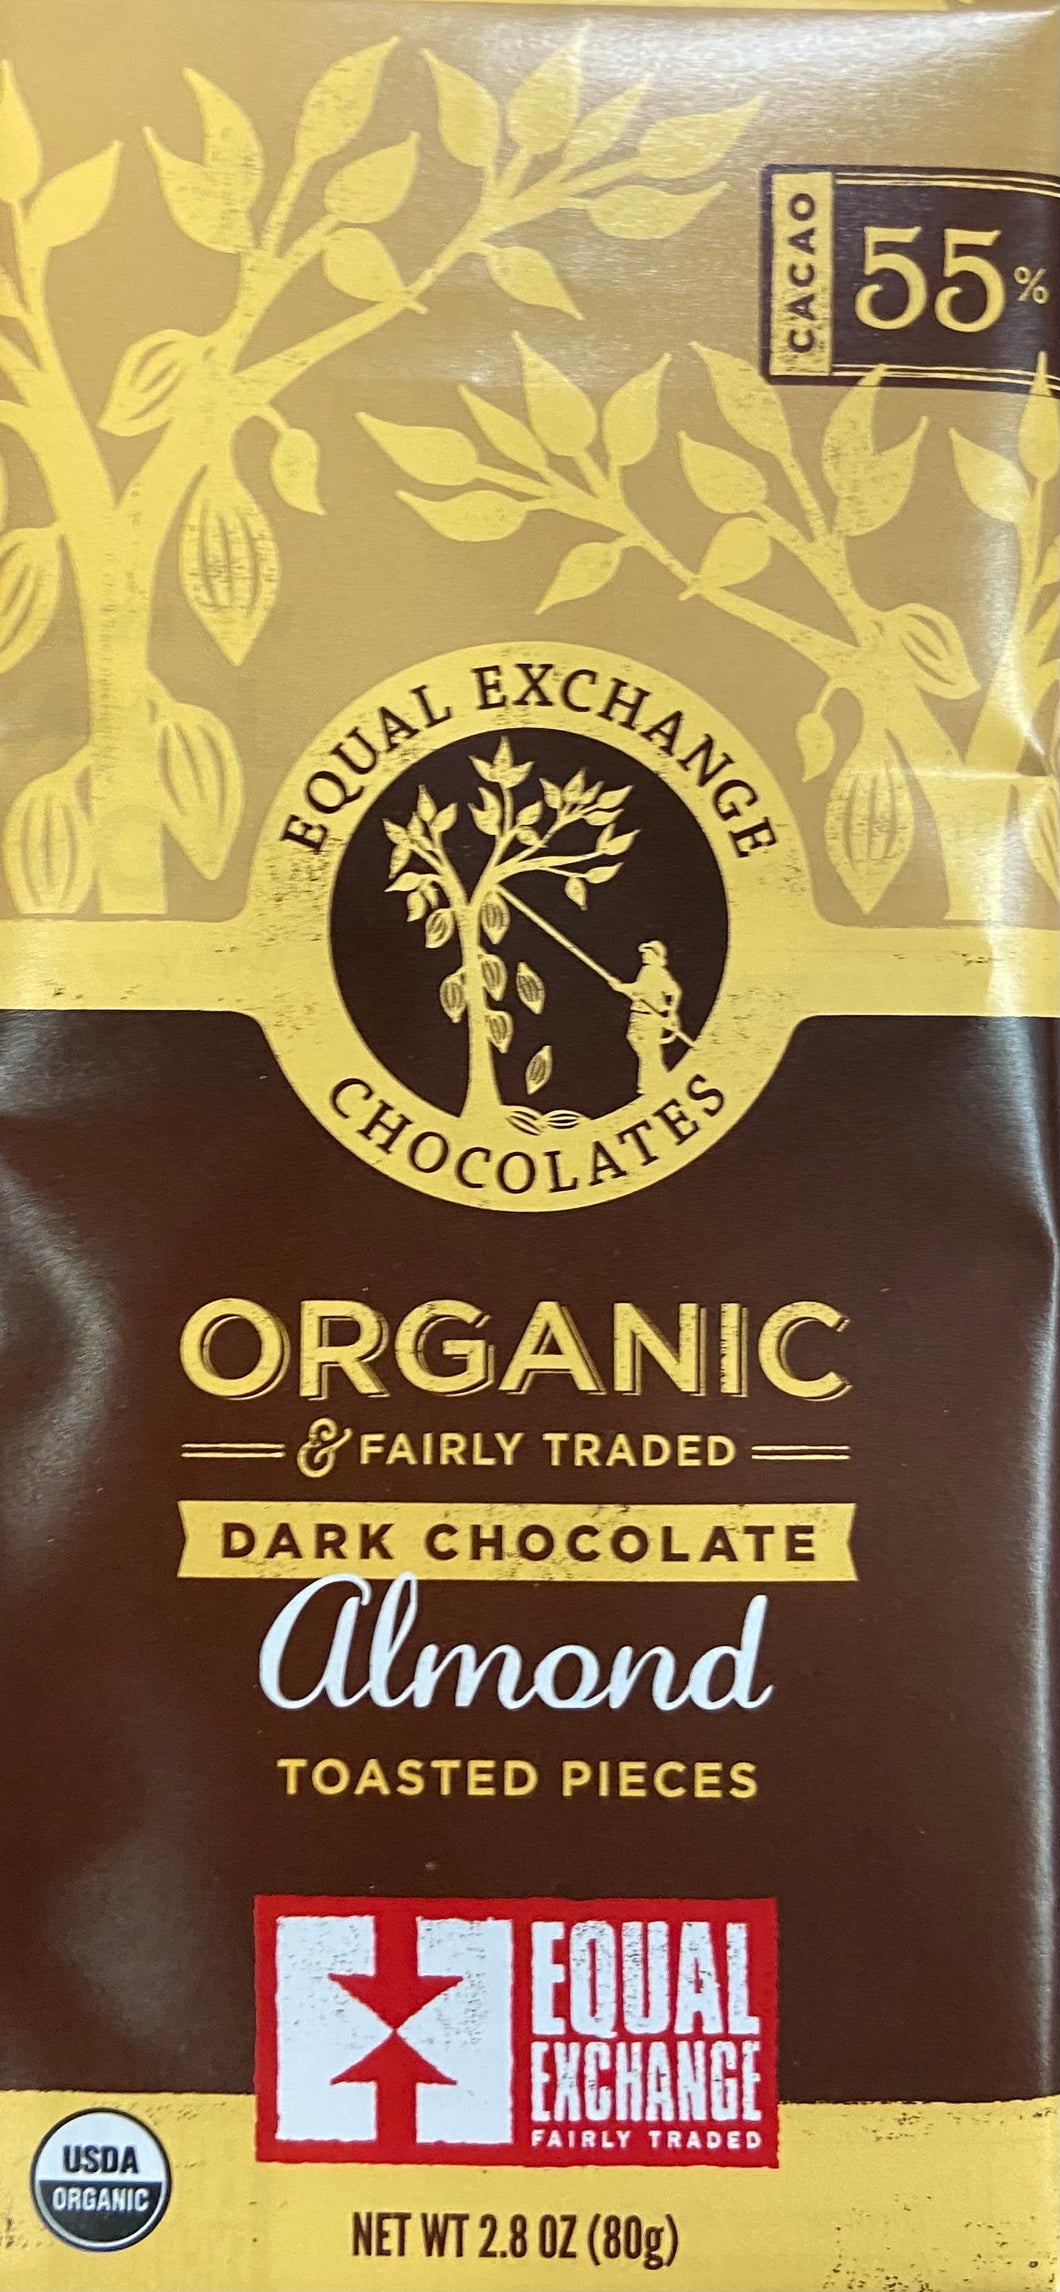 Chocolate Bar, Dark with Toasted Almond Pieces, Organic 55% Cacao, Equal Exchange